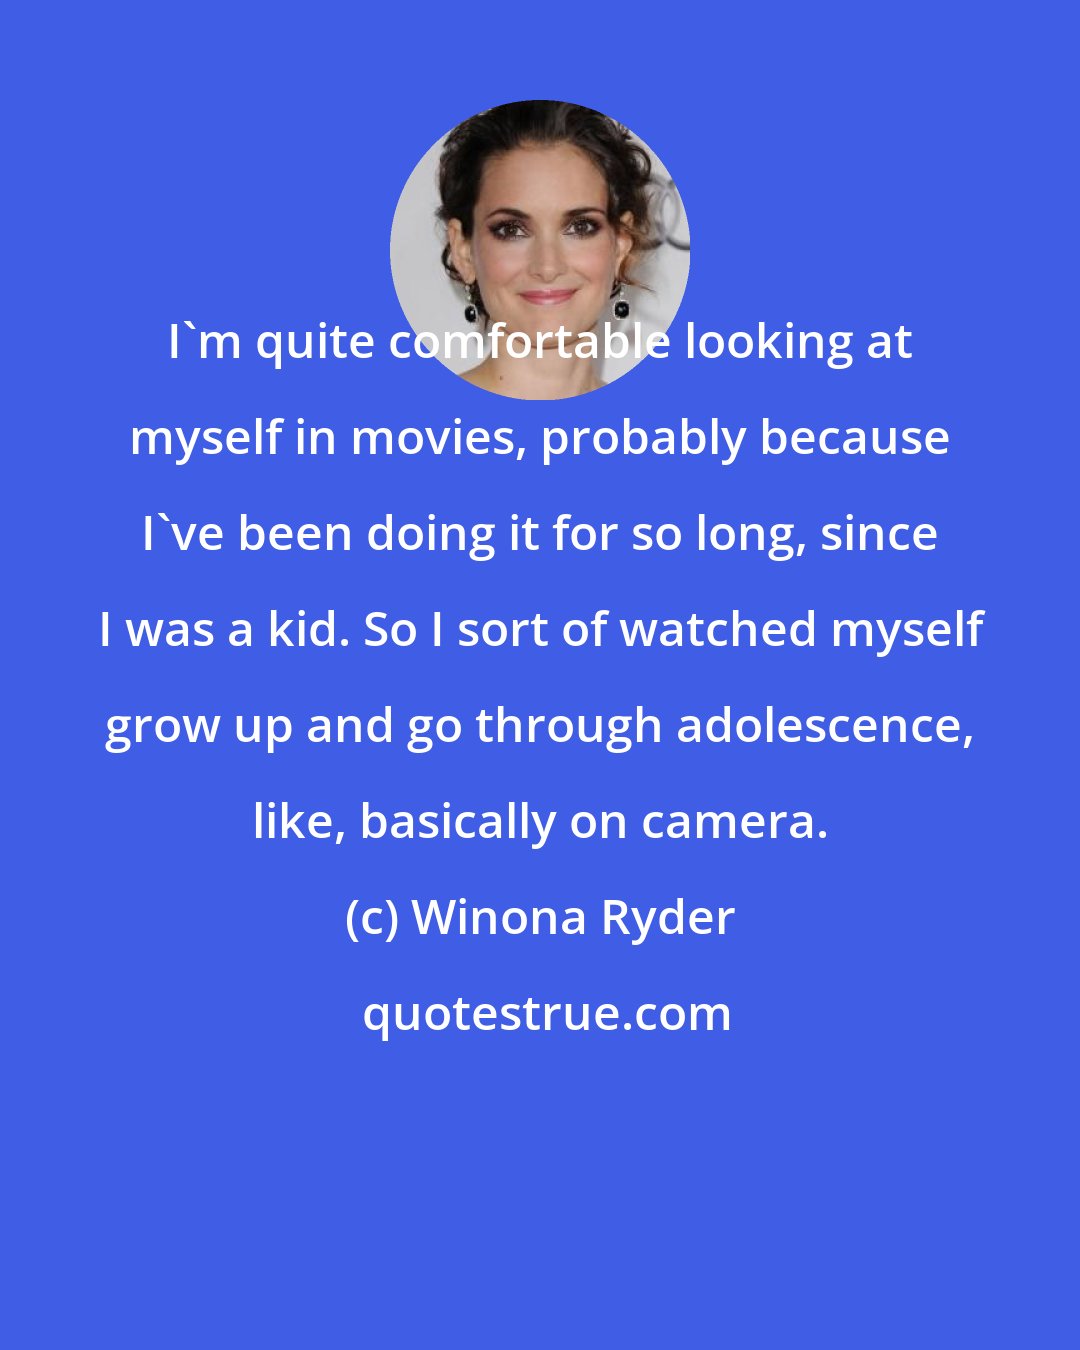 Winona Ryder: I'm quite comfortable looking at myself in movies, probably because I've been doing it for so long, since I was a kid. So I sort of watched myself grow up and go through adolescence, like, basically on camera.